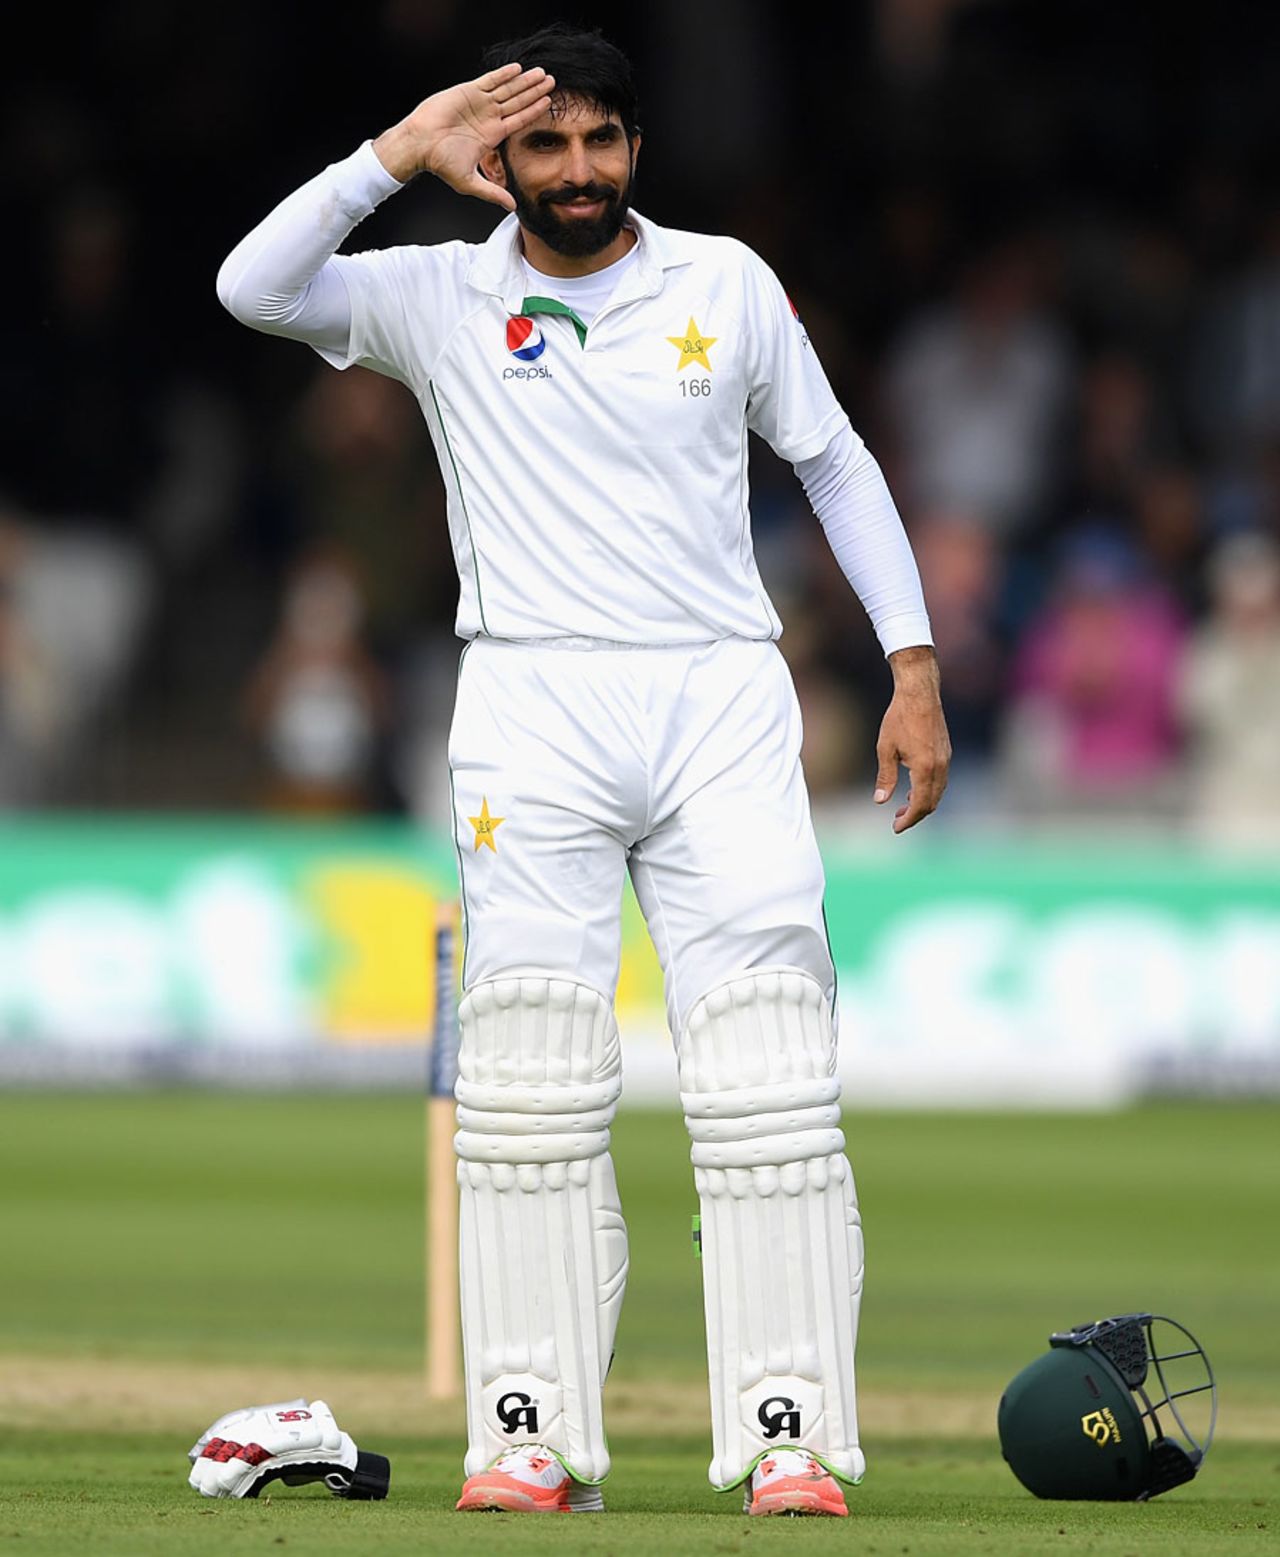 Misbah-ul-Haq salutes on reaching three figures, England v Pakistan, 1st Investec Test, Lord's, 1st day, July 14, 2016